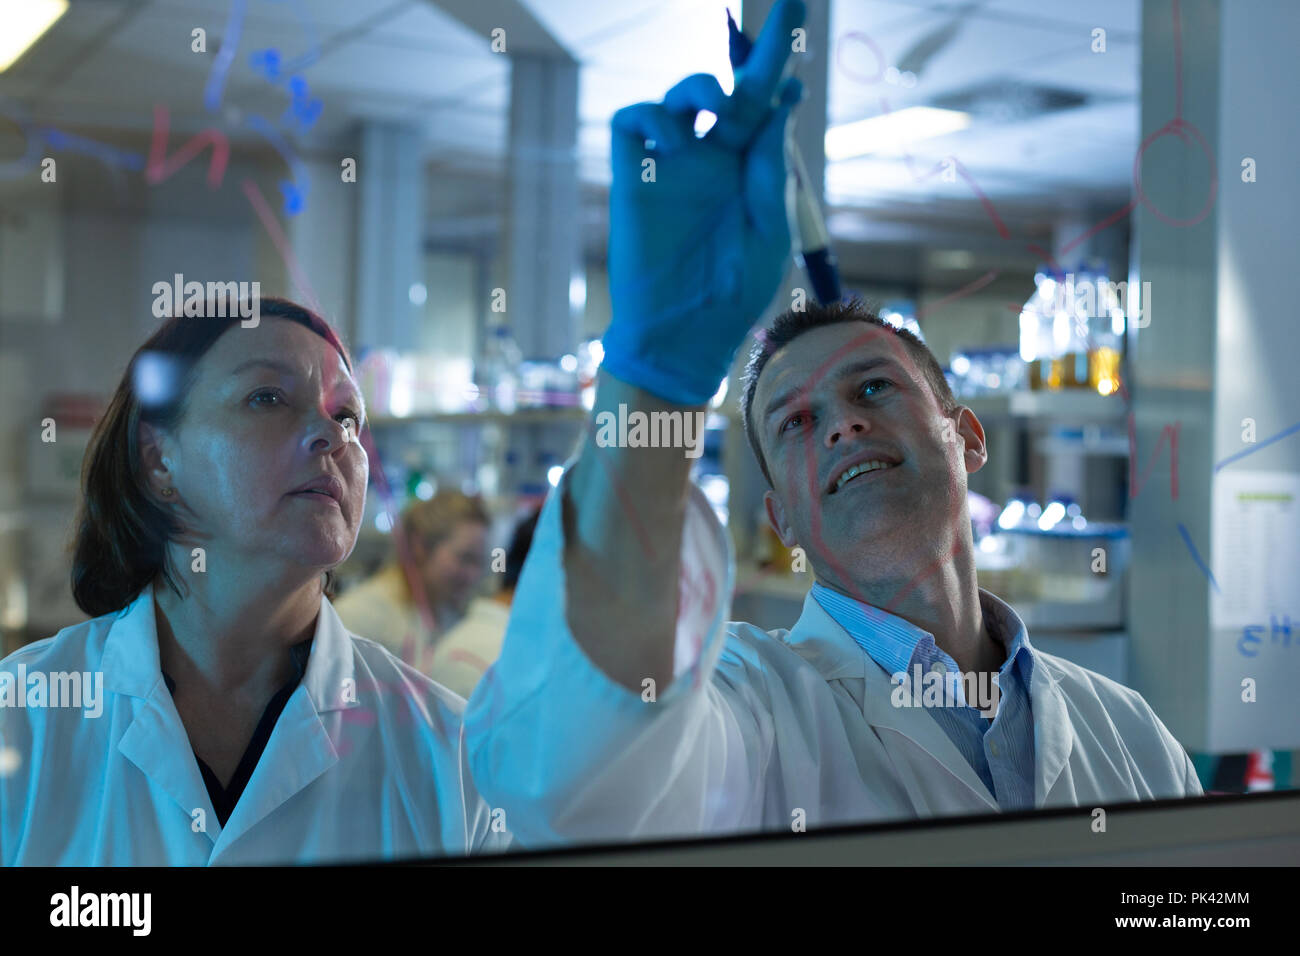 Team of scientist discussing on glass board Stock Photo